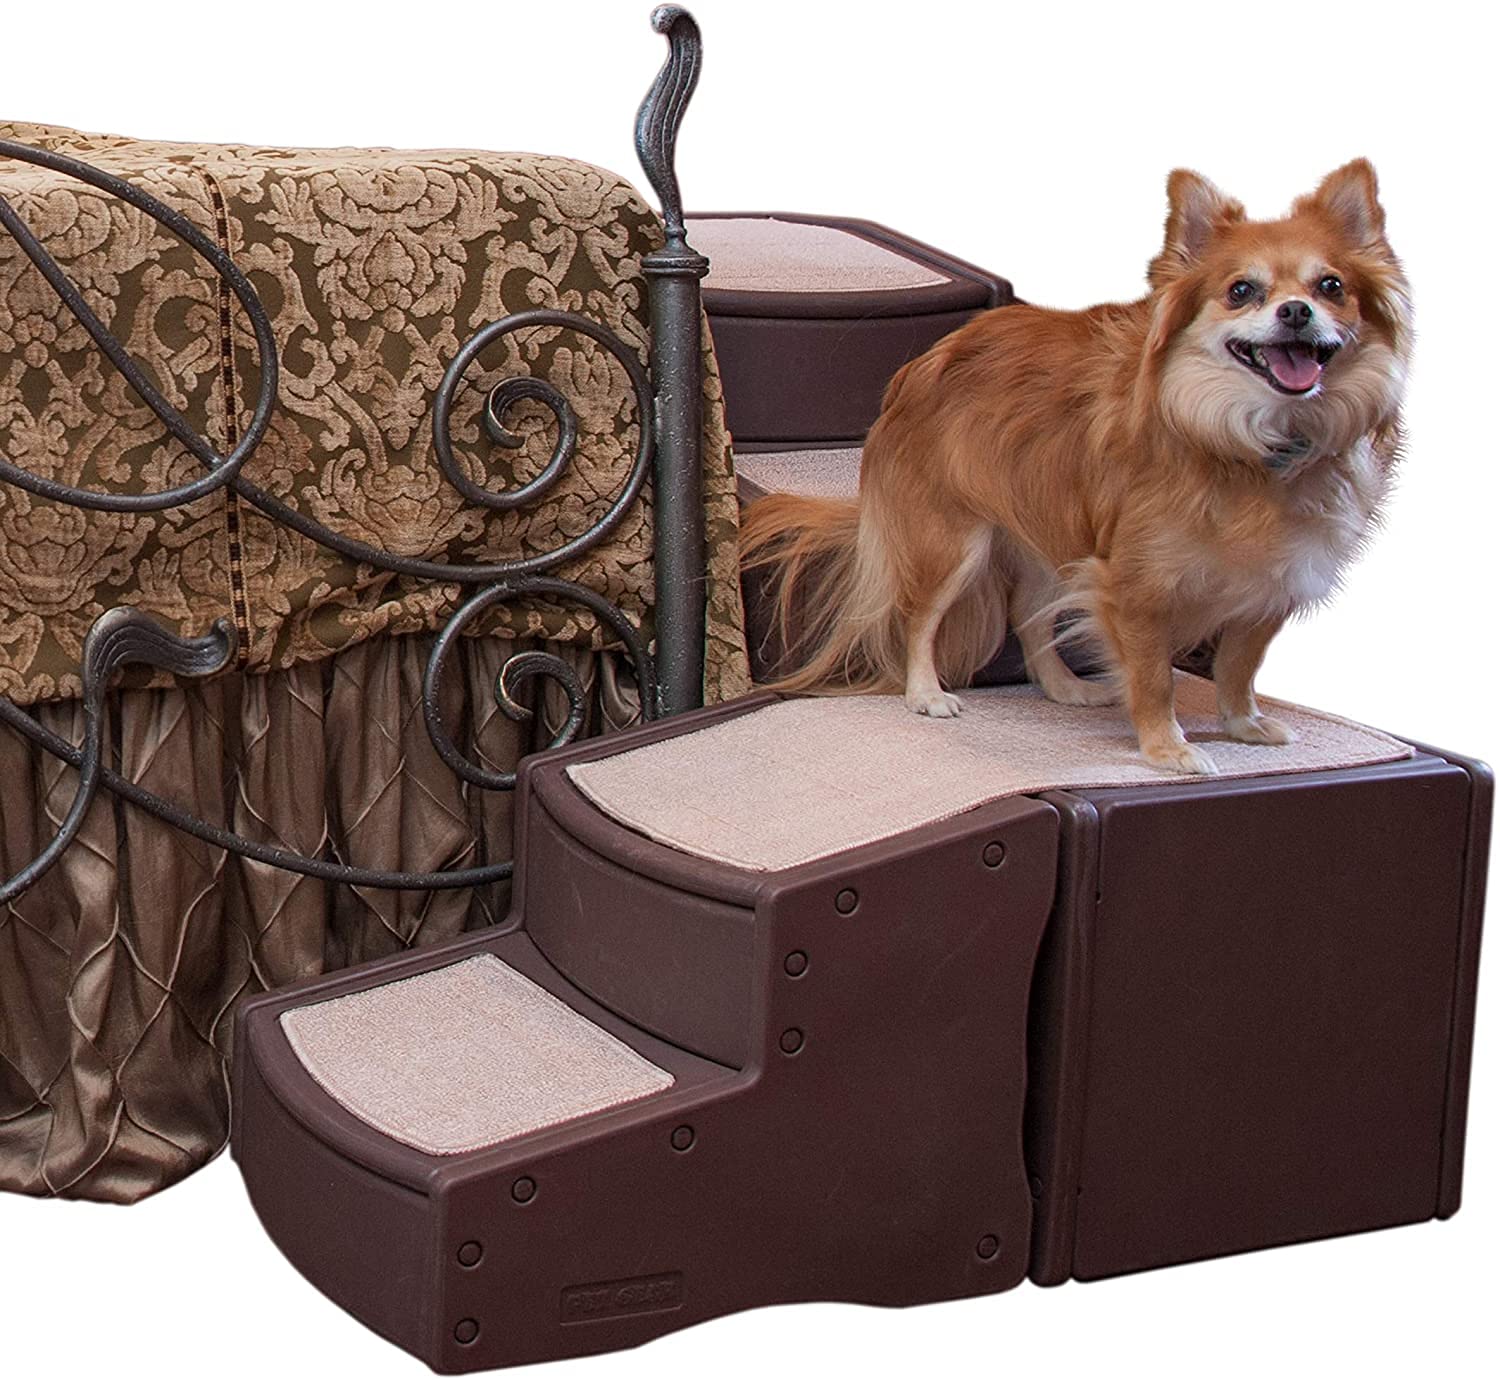 Pet Gear Easy Step Bed Stair For Catsdogs, Adjusts To Either Side Of Bed, Removable Washable Carpet Treads, Storage Compartment,